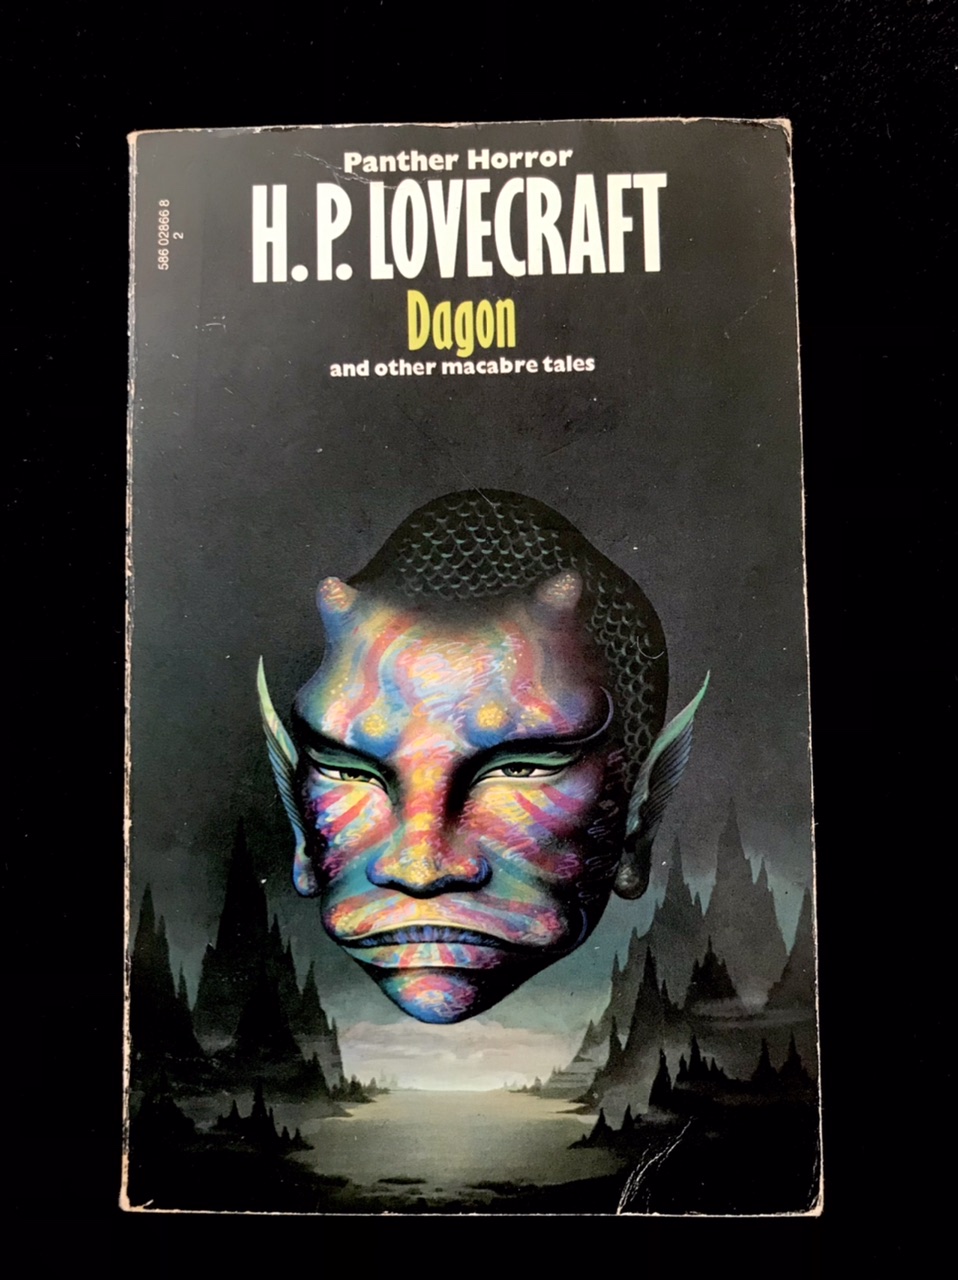 Dagon & Other Macabre Tales by H. P. Lovecraft